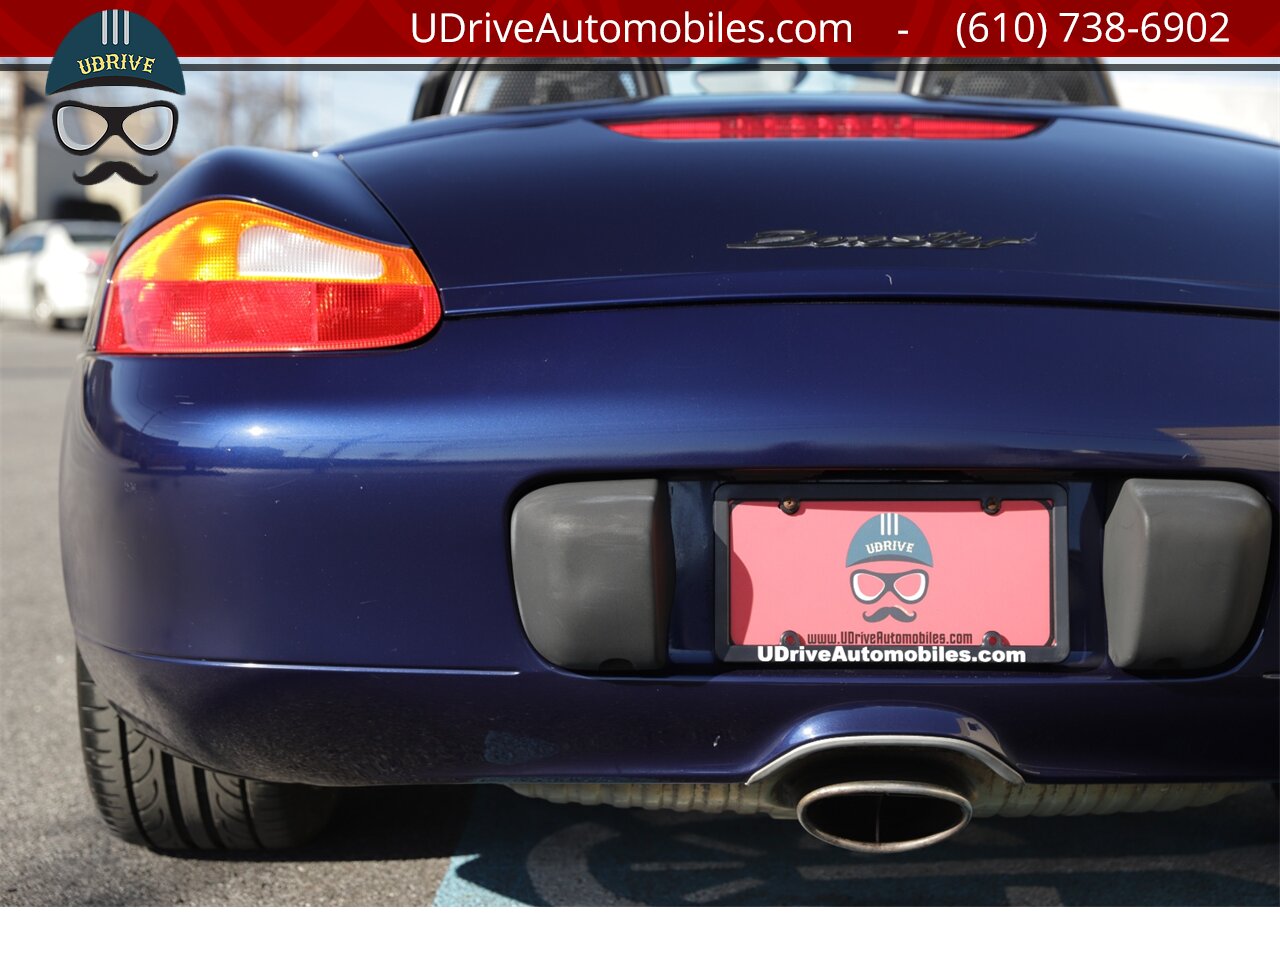 2001 Porsche Boxster 5 Speed Manual Detailed Service History  Same Owner for Last 18 Years Hard Top Included - Photo 18 - West Chester, PA 19382